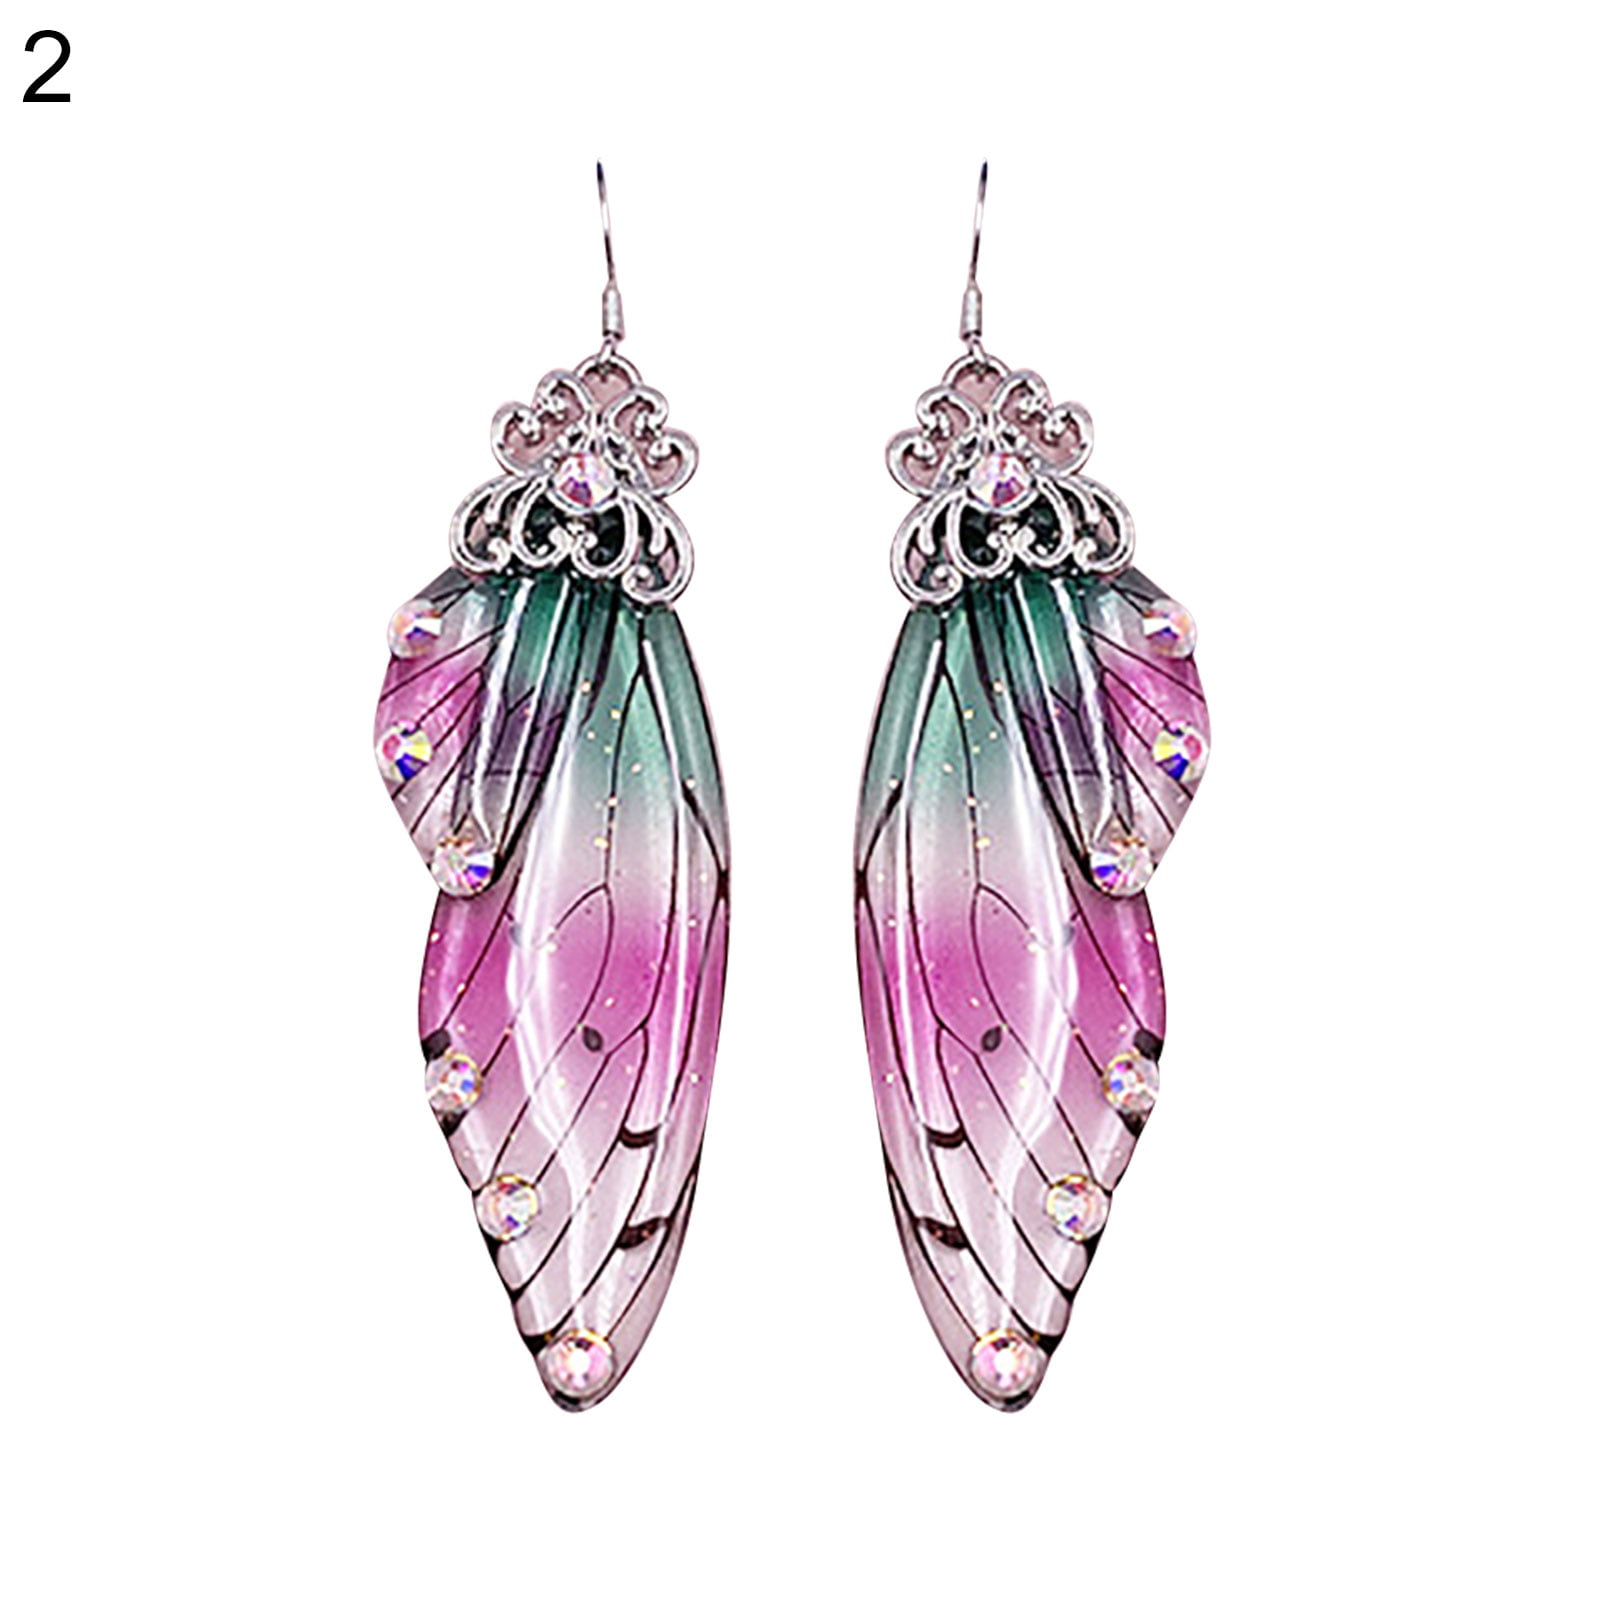 Party Gifts Ladies Fashion Cute Shiny White Zircon Earrings Elegant and Charming Earrings Jewelry 